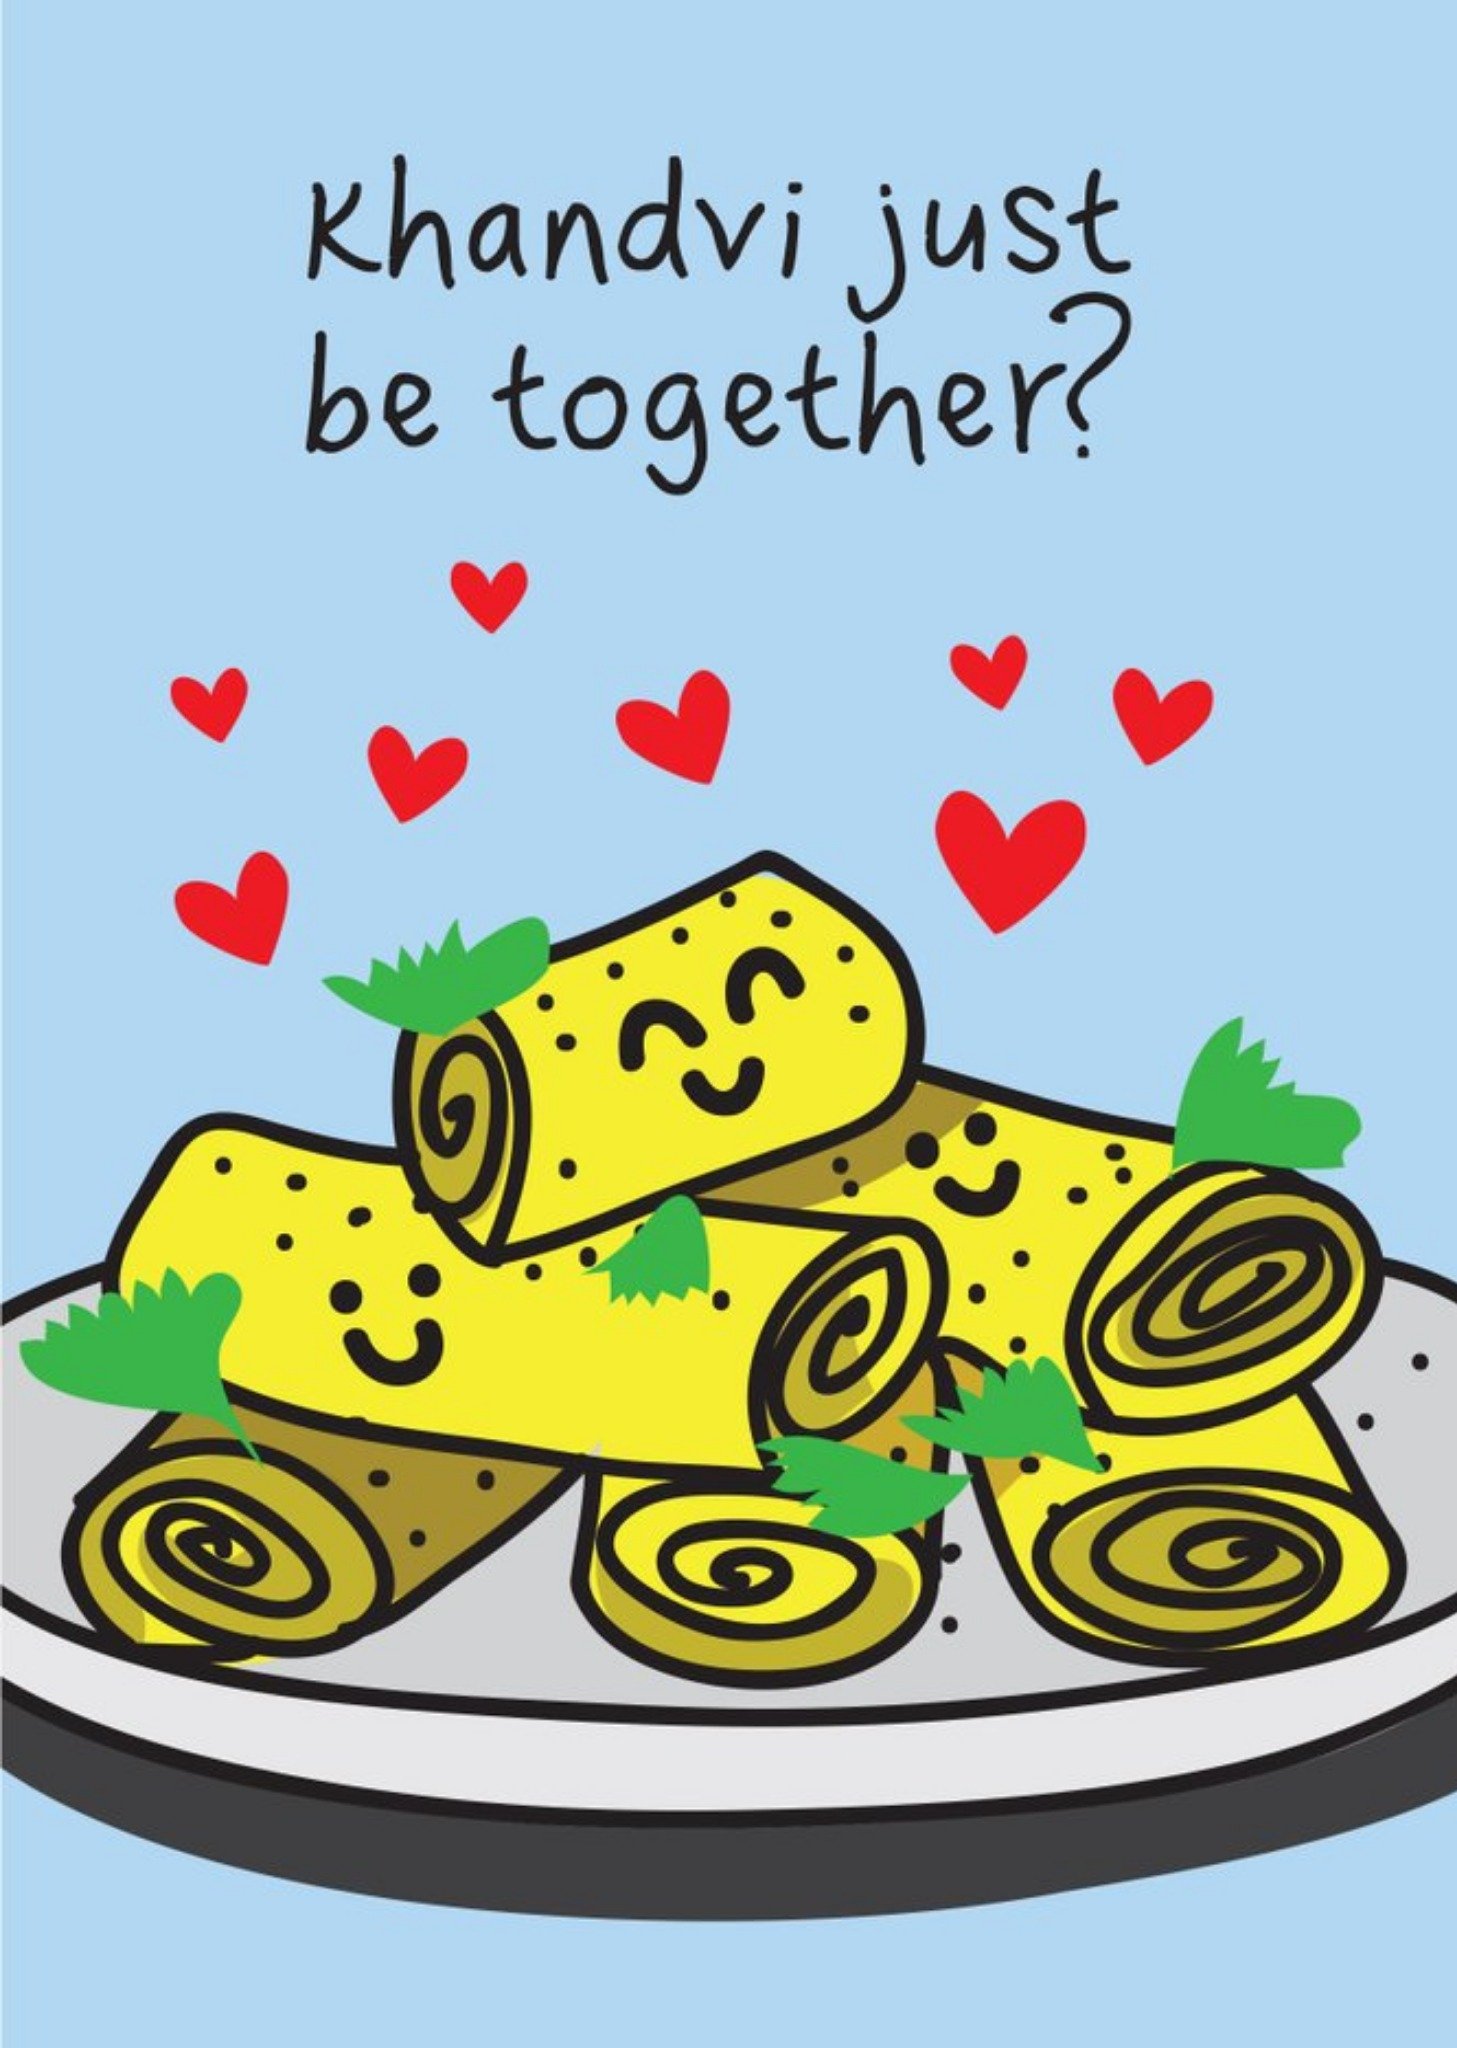 Moonpig The Playful Indian Khandvi Just Be Together Valentines Day Card, Large